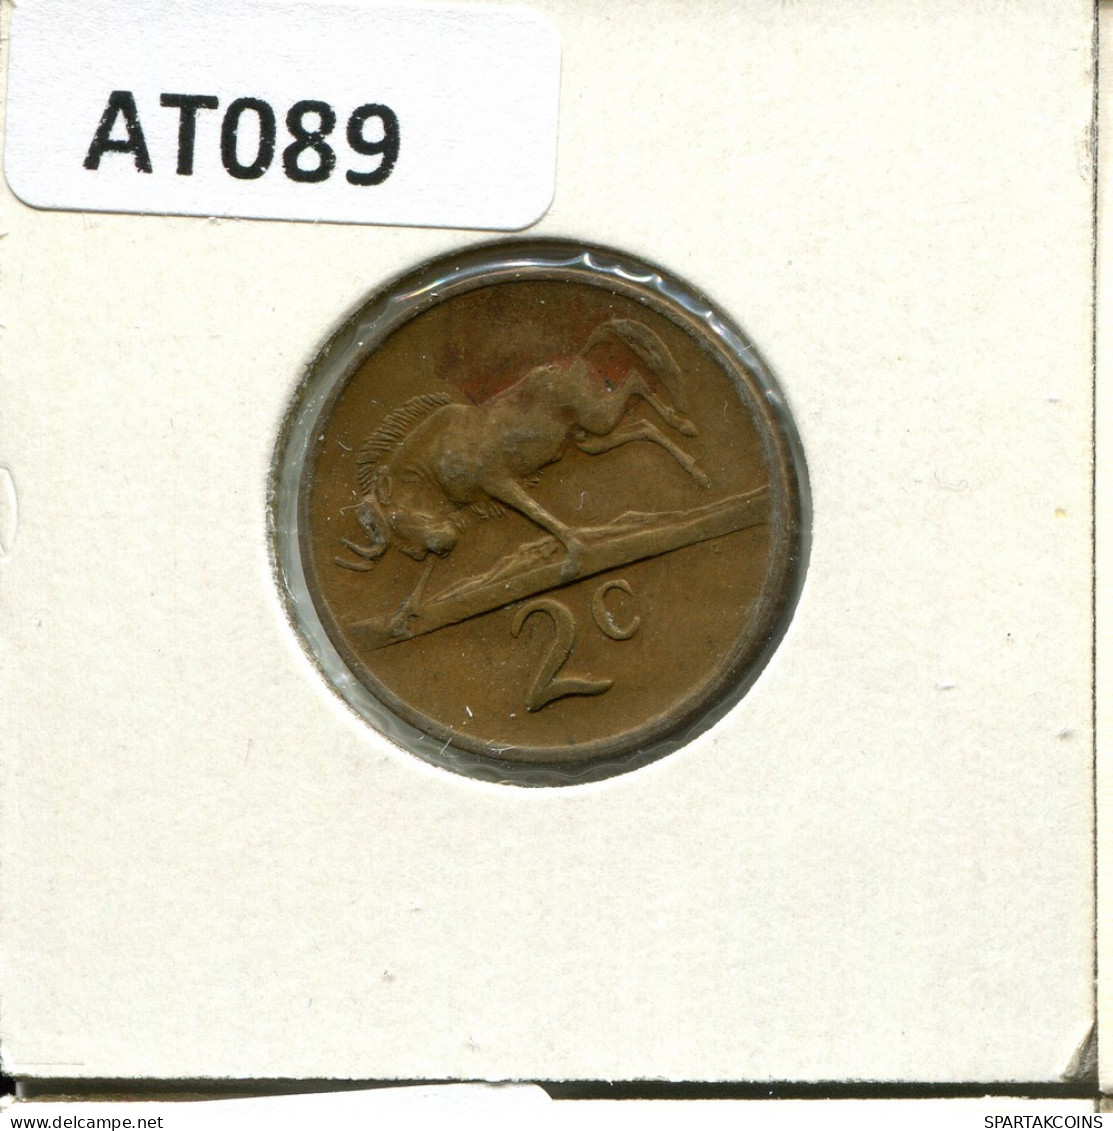 2 CENTS 1974 SÜDAFRIKA SOUTH AFRICA Münze #AT089.D.A - South Africa